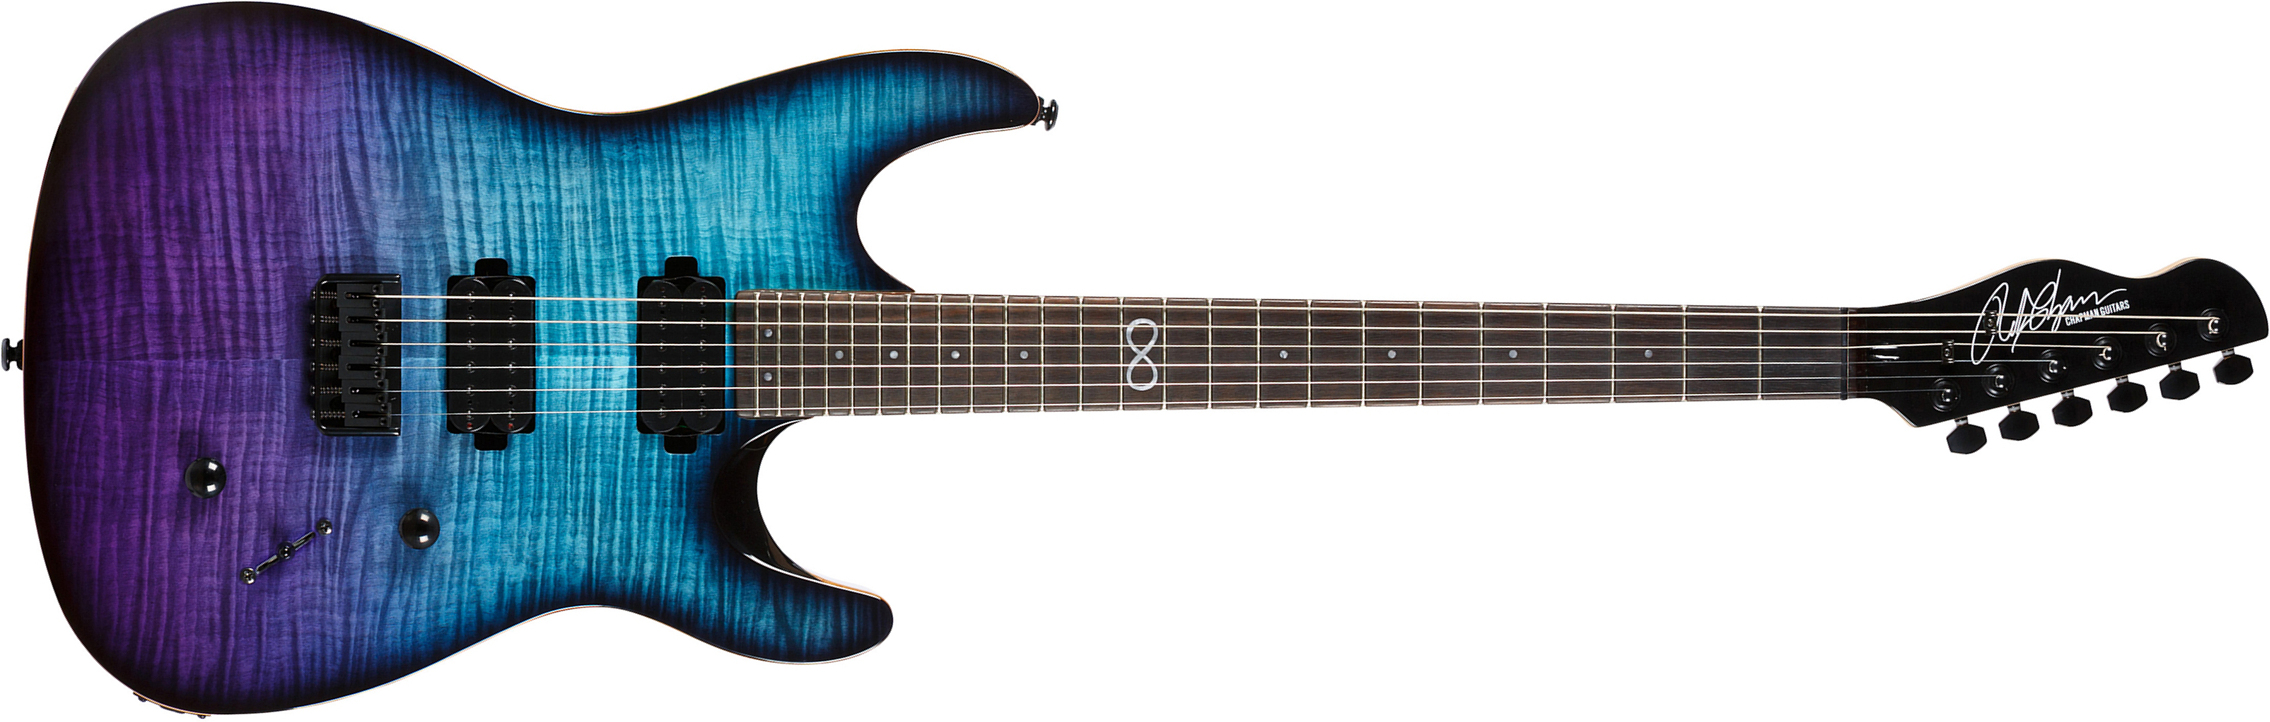 Chapman Guitars Ml1 Modern Standard V2 Hh Ht Eb - Abyss - Double cut electric guitar - Main picture